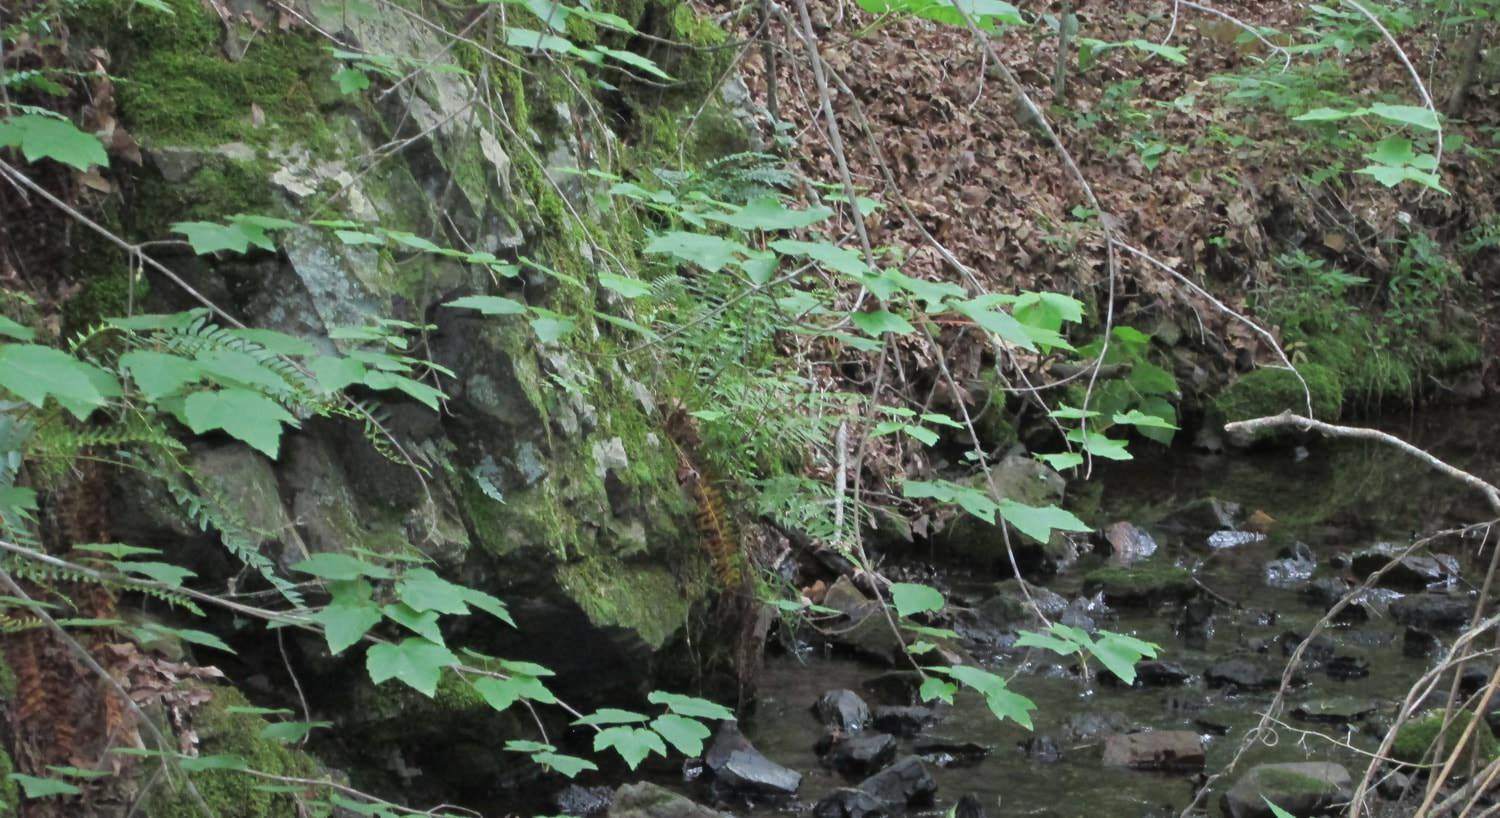 Water rippling over rocks surrounded by brown leaves and green leafy plants